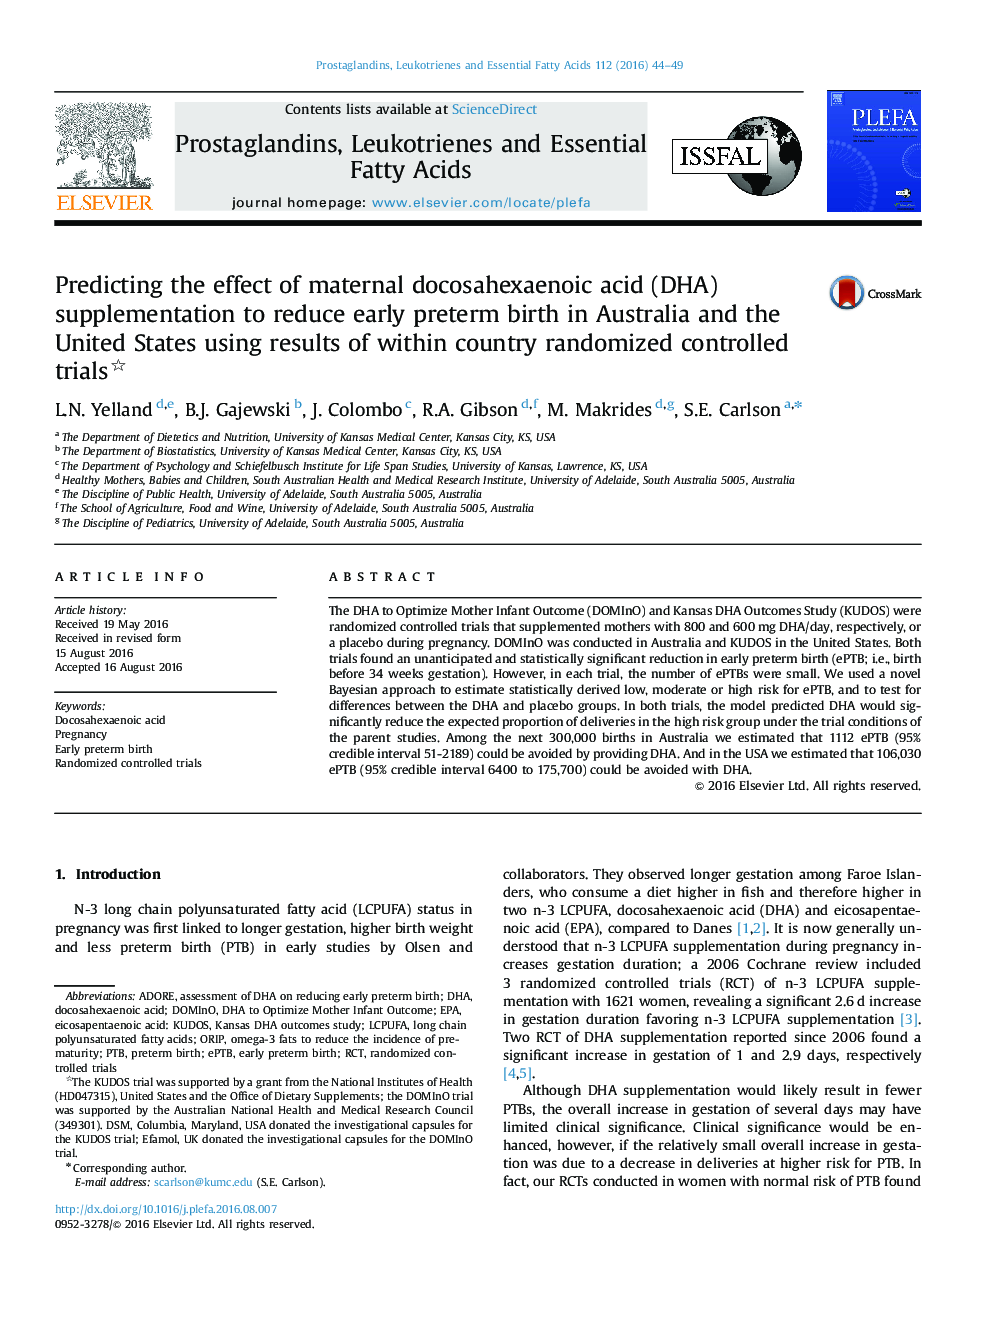 Predicting the effect of maternal docosahexaenoic acid (DHA) supplementation to reduce early preterm birth in Australia and the United States using results of within country randomized controlled trials 